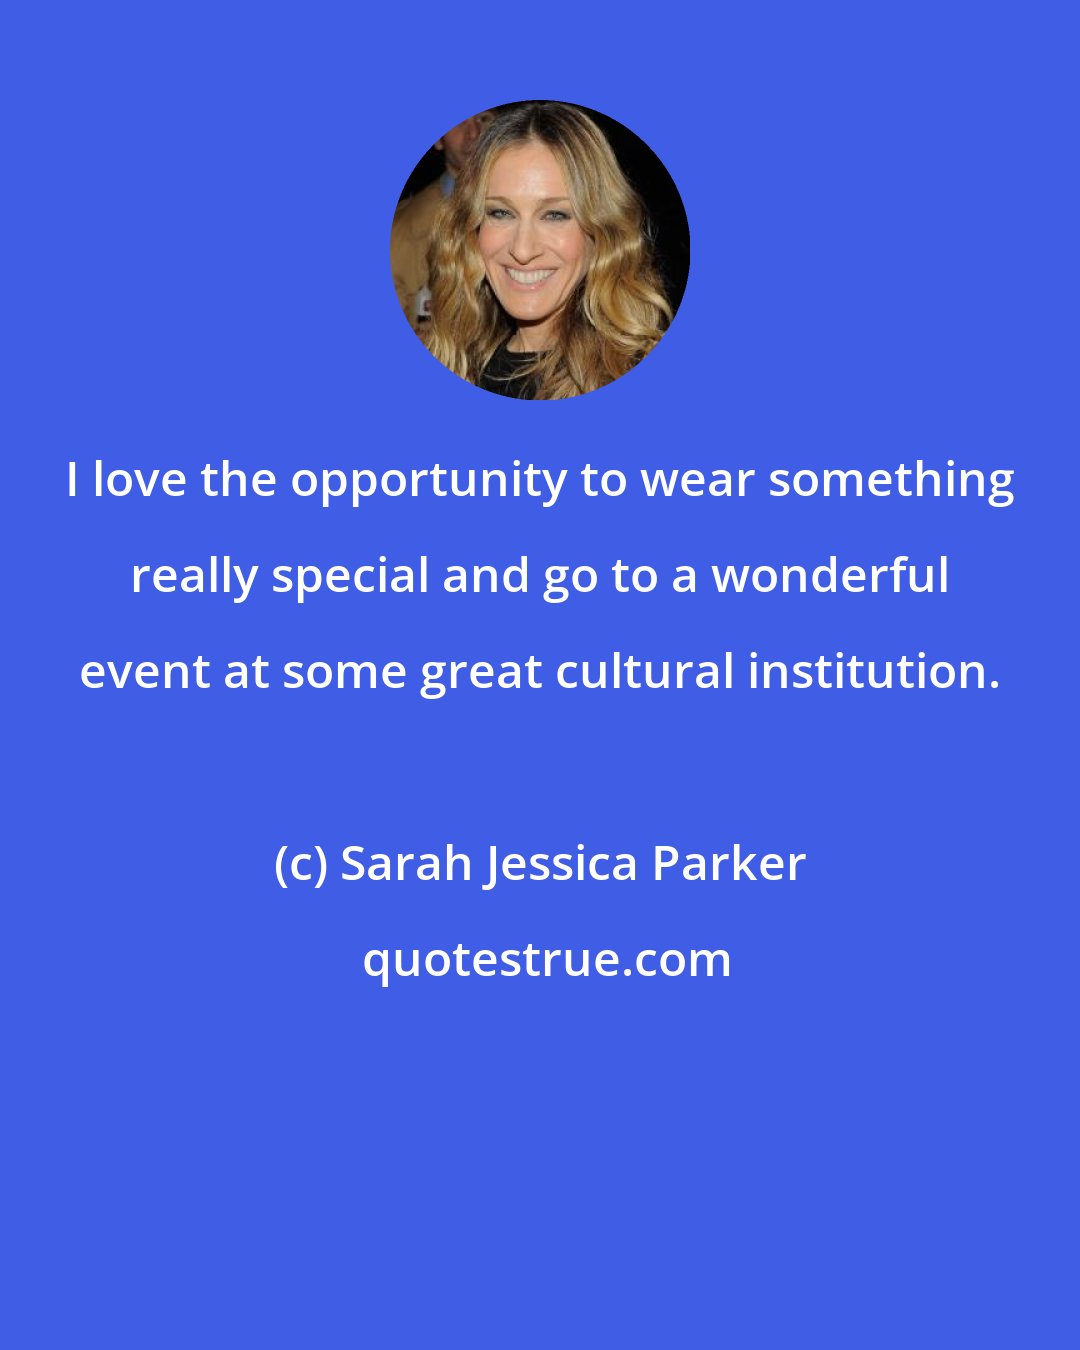 Sarah Jessica Parker: I love the opportunity to wear something really special and go to a wonderful event at some great cultural institution.